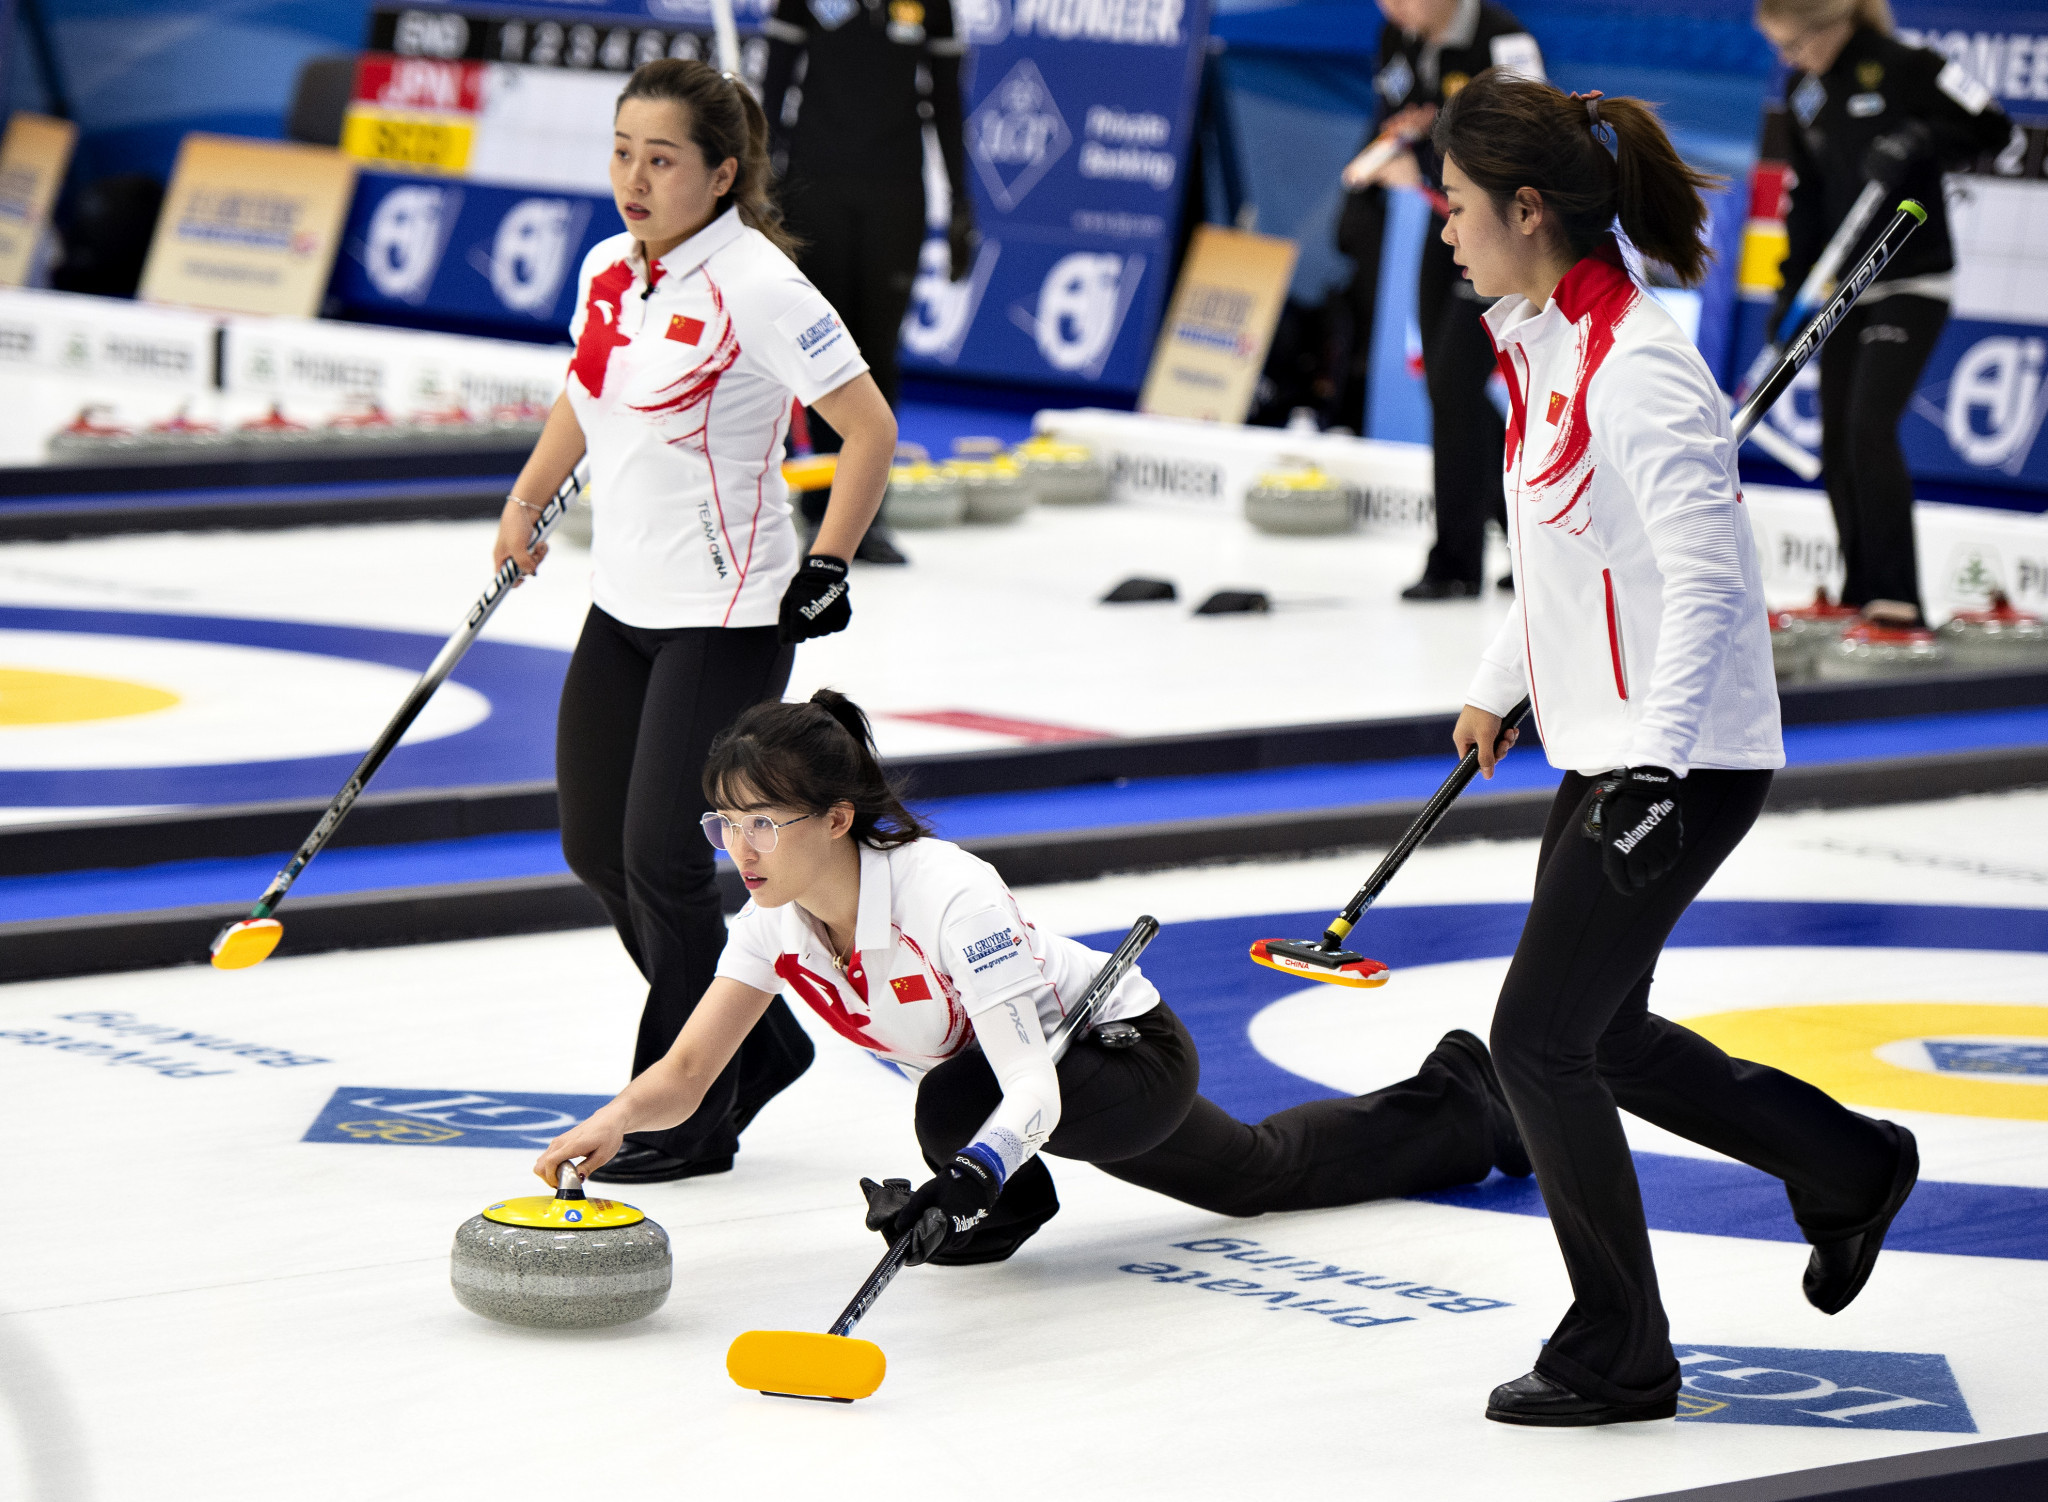 China's supreme form continues at Women's World Curling Championships 